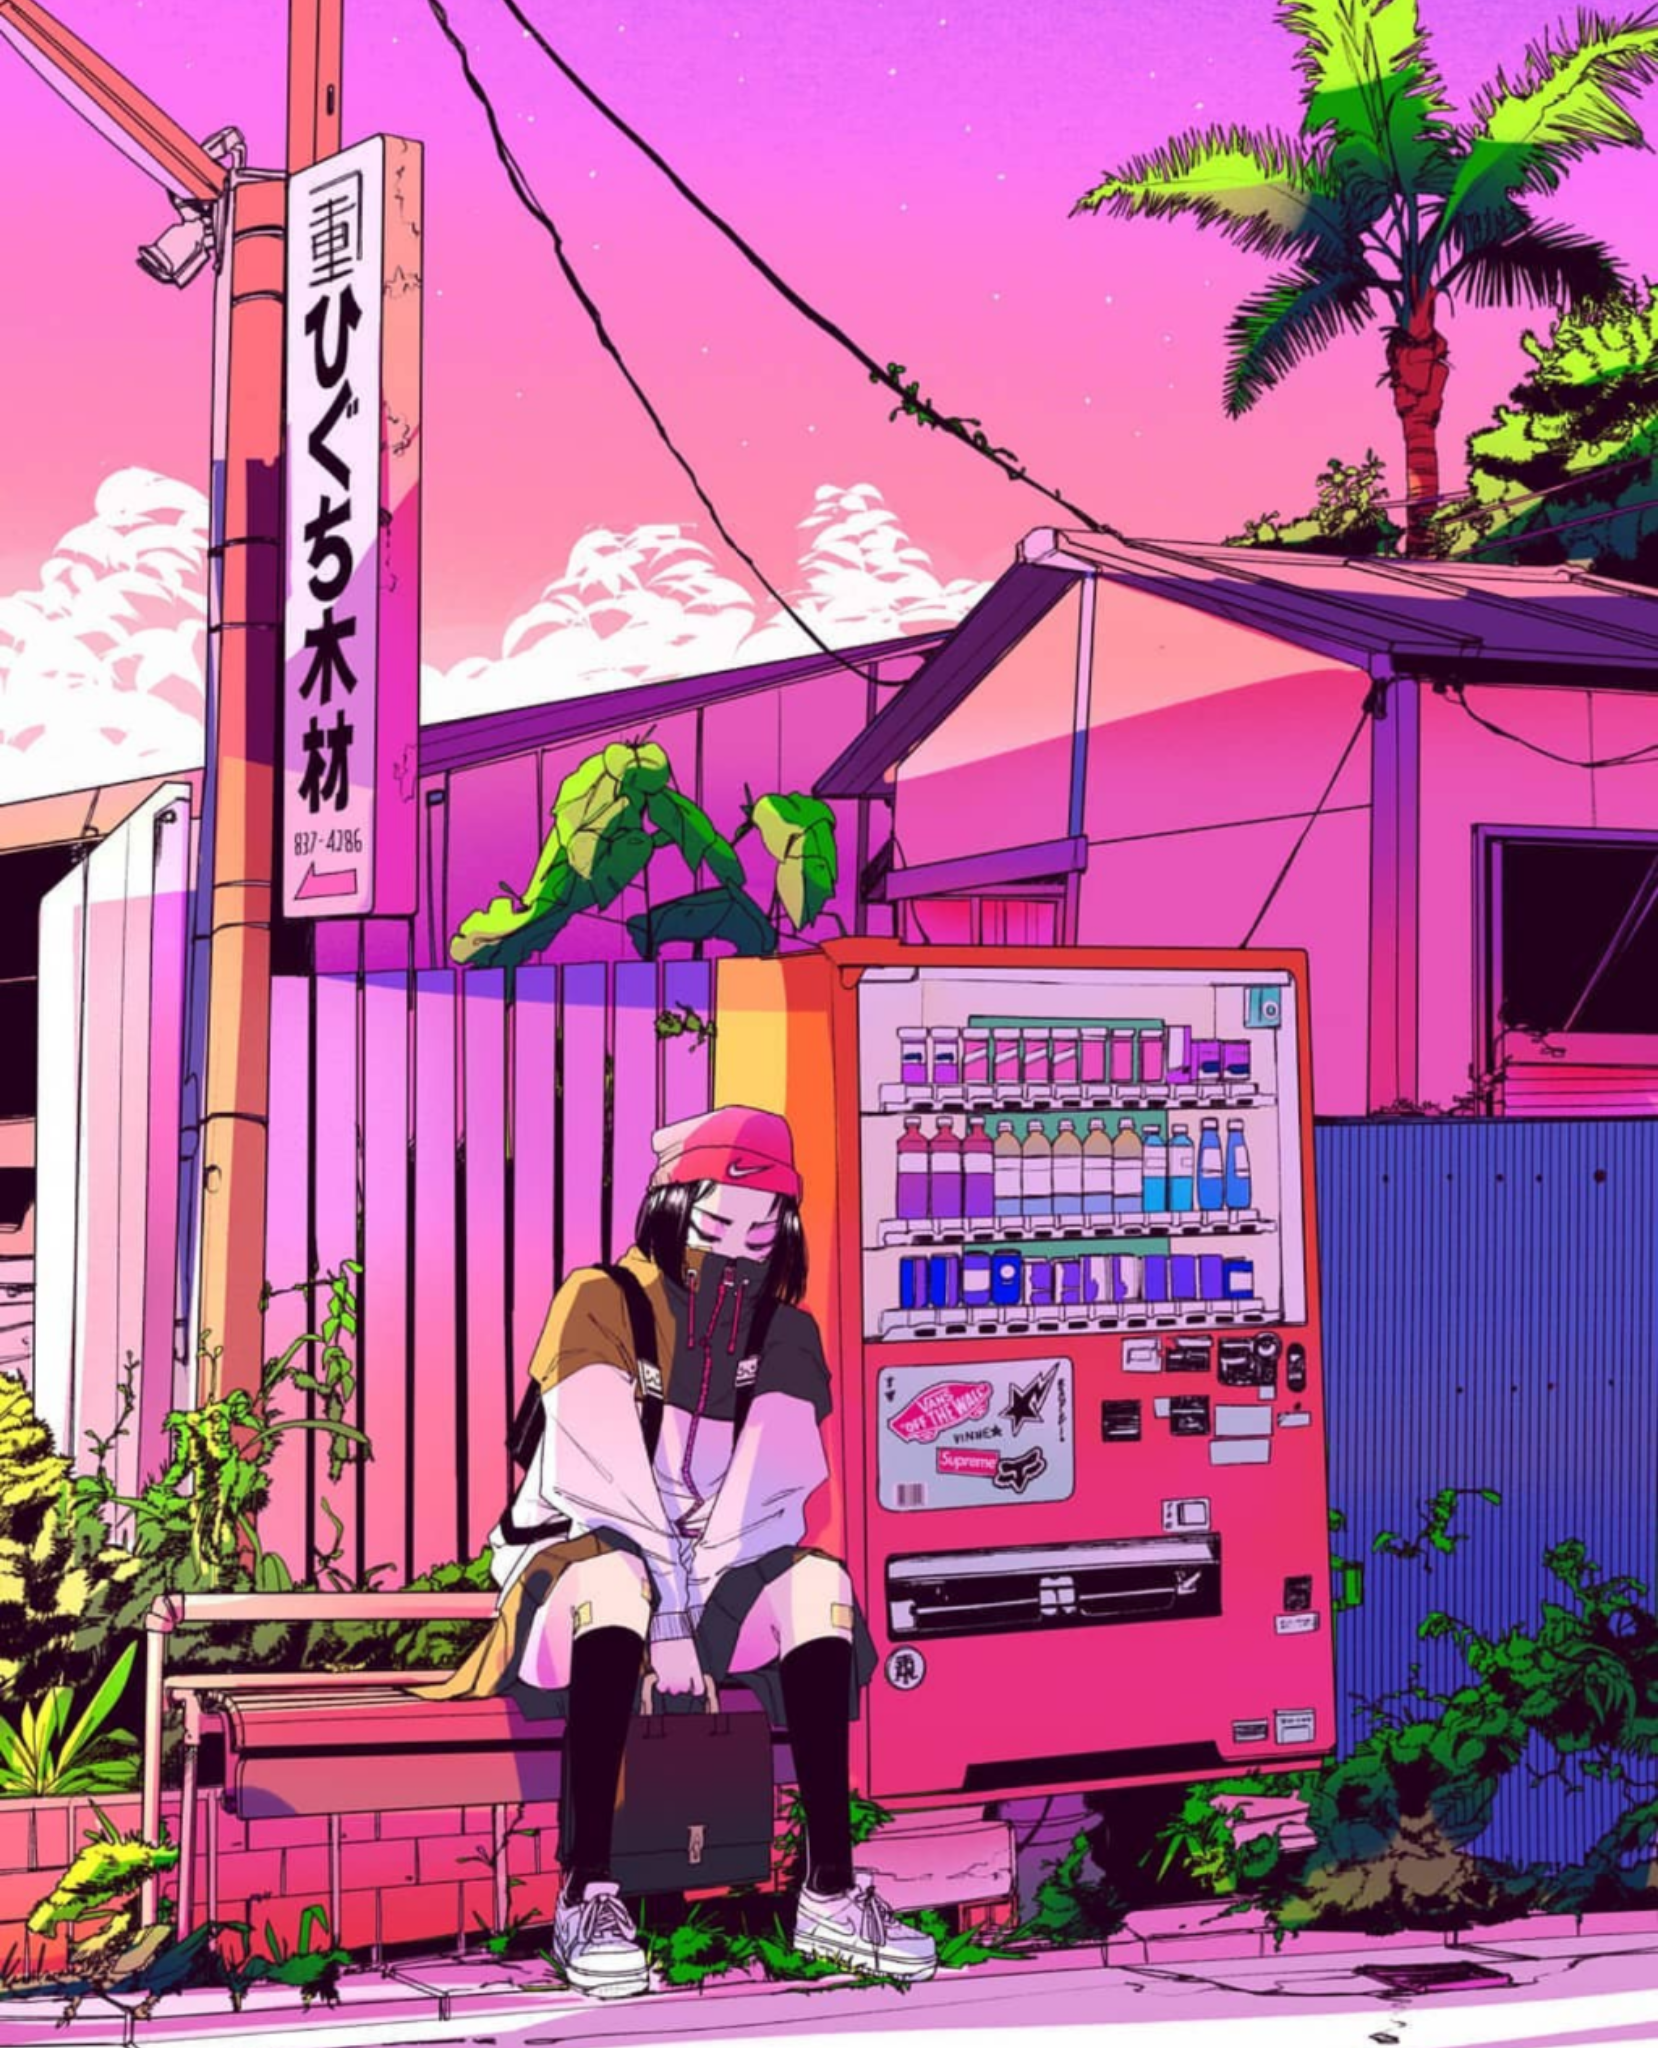 Can someone find me a 1440p or higher resolution image for this. Seriously appreciate it. Tha. Papel de parede vaporwave, Wallpaper bonitos, Wallpaper paisagens